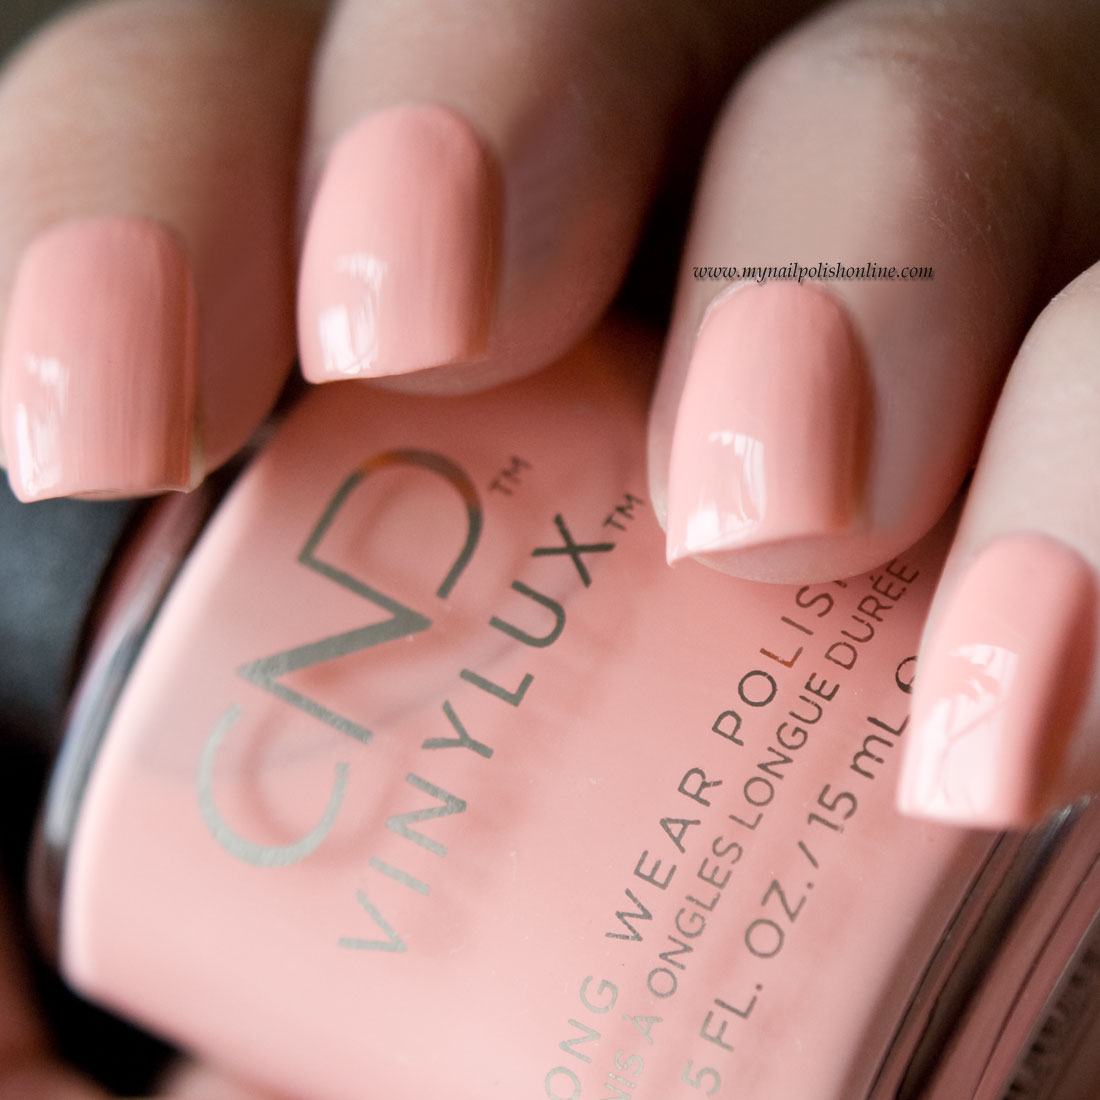 CND-Vinylux-Forever-Yours - My Nail Polish Online